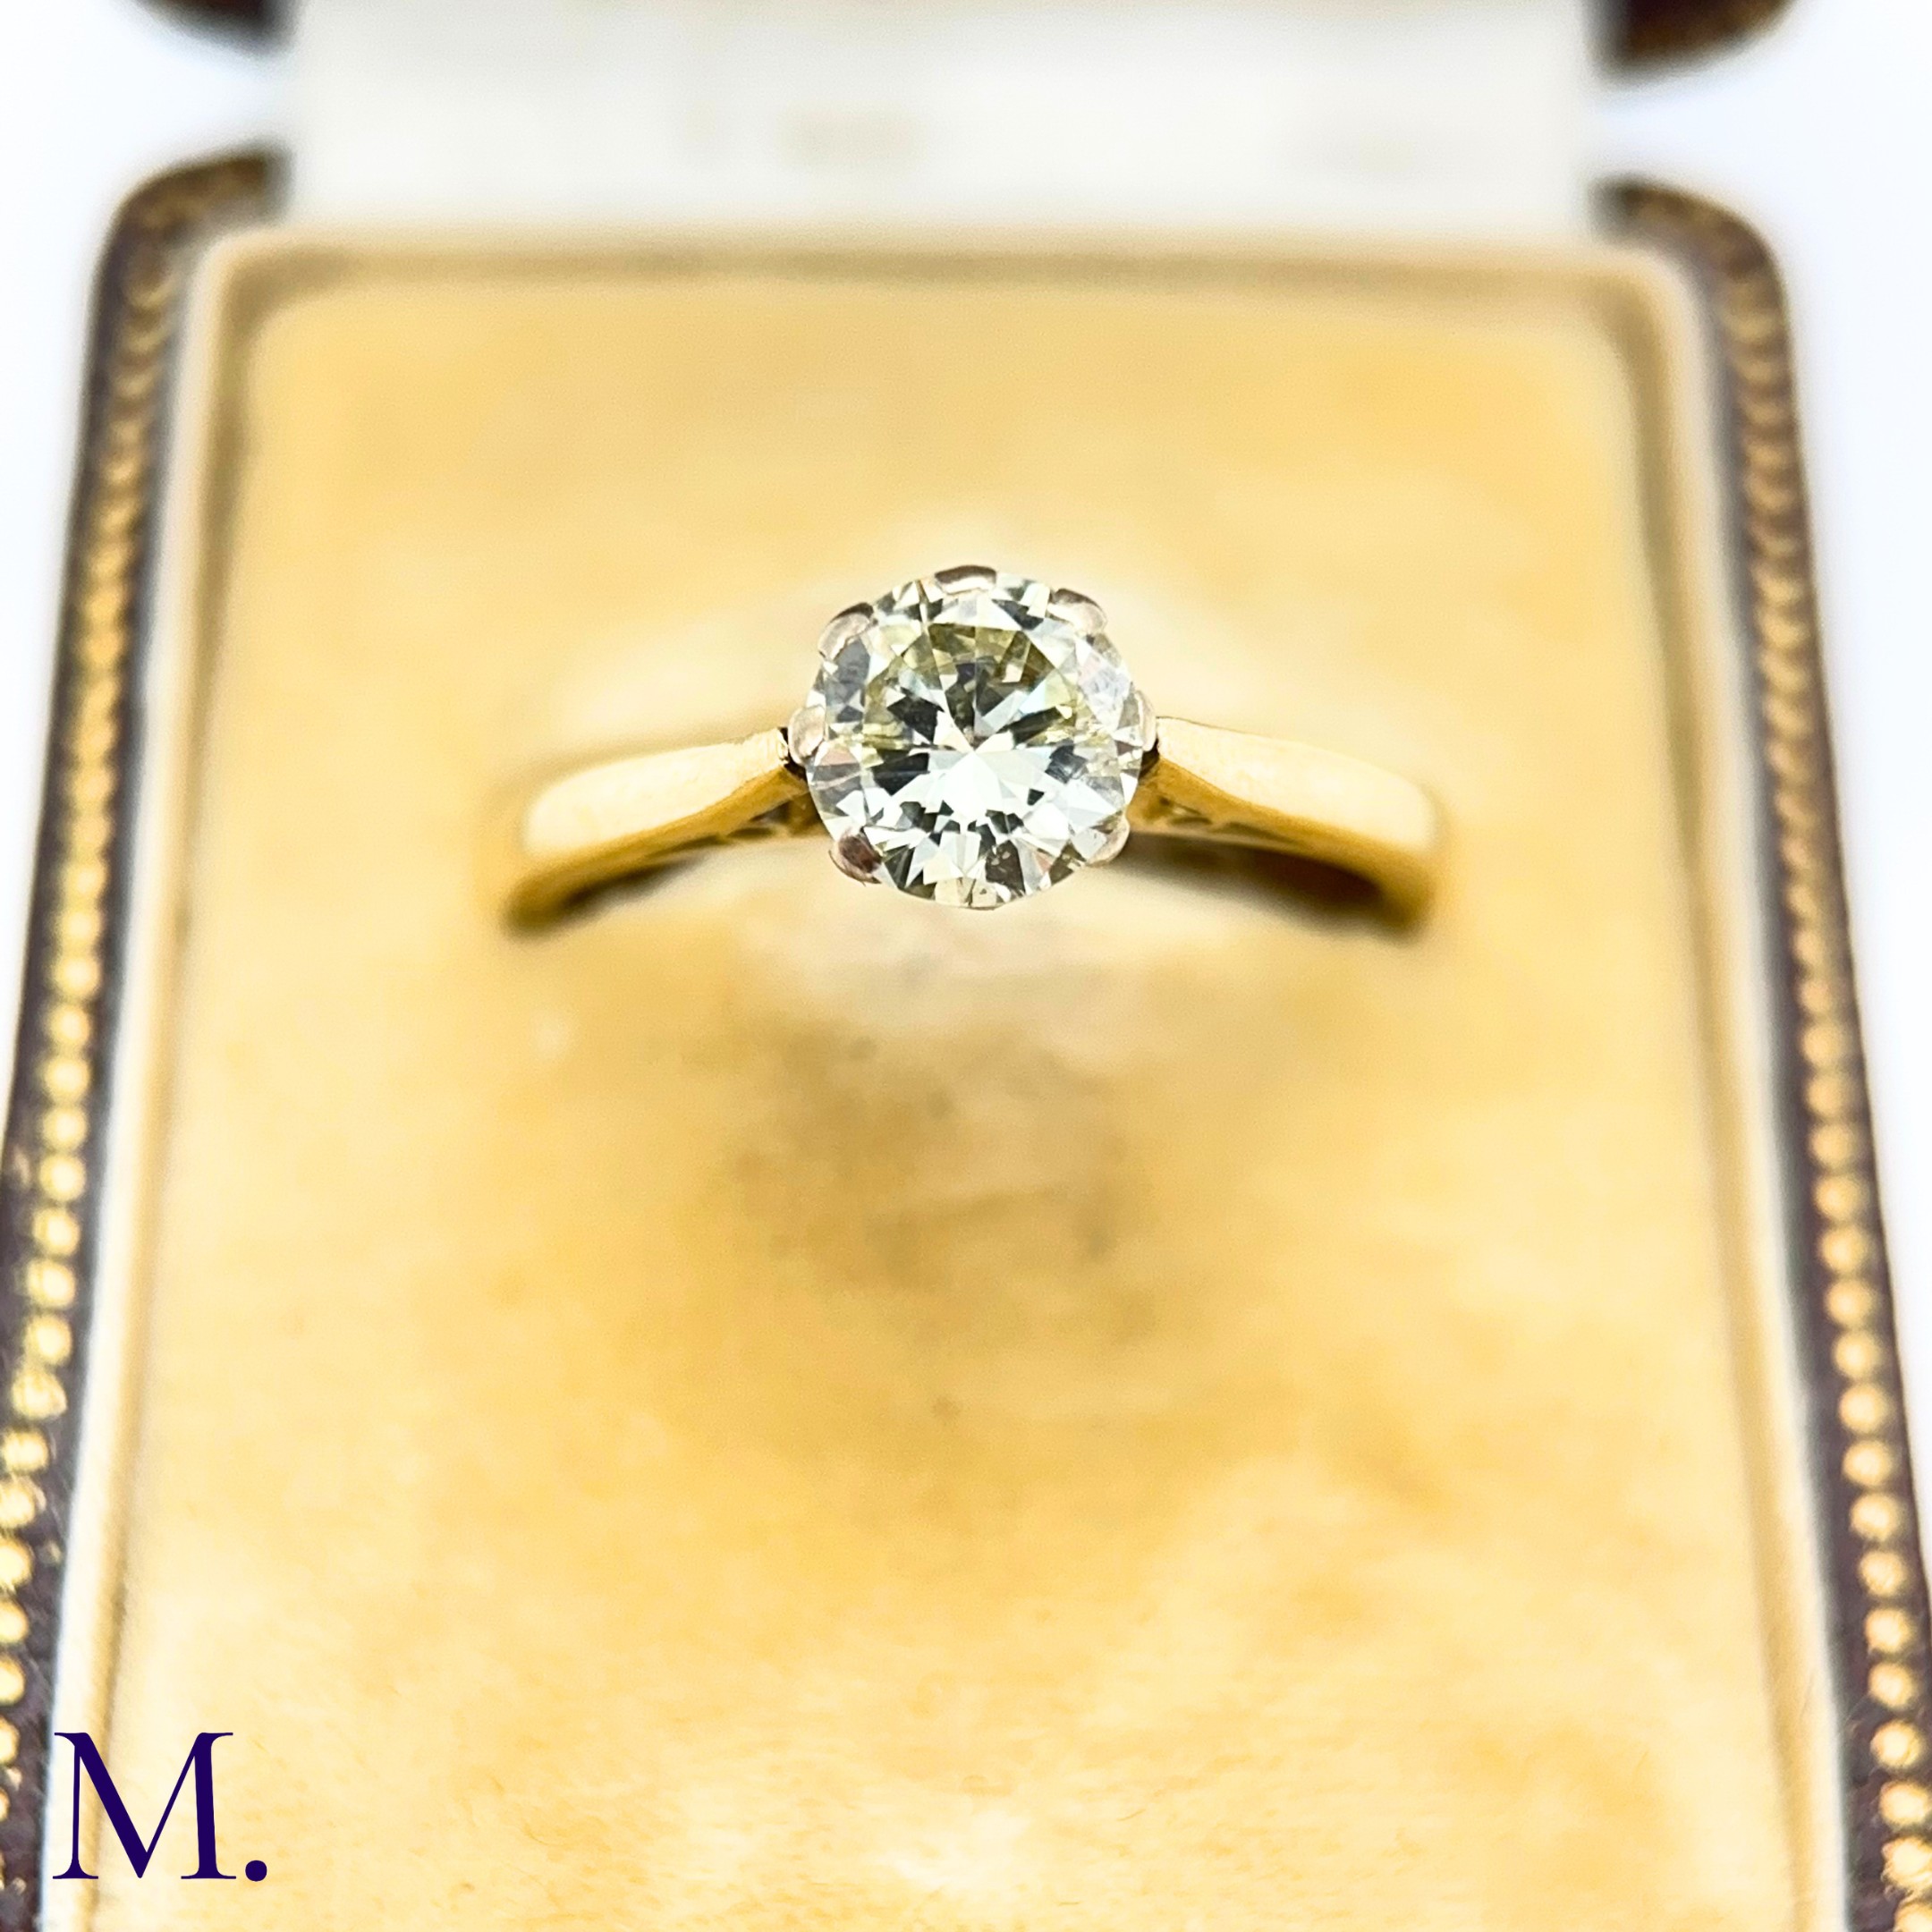 A Solitaire Ring (c. 0.75ct) - Image 3 of 6